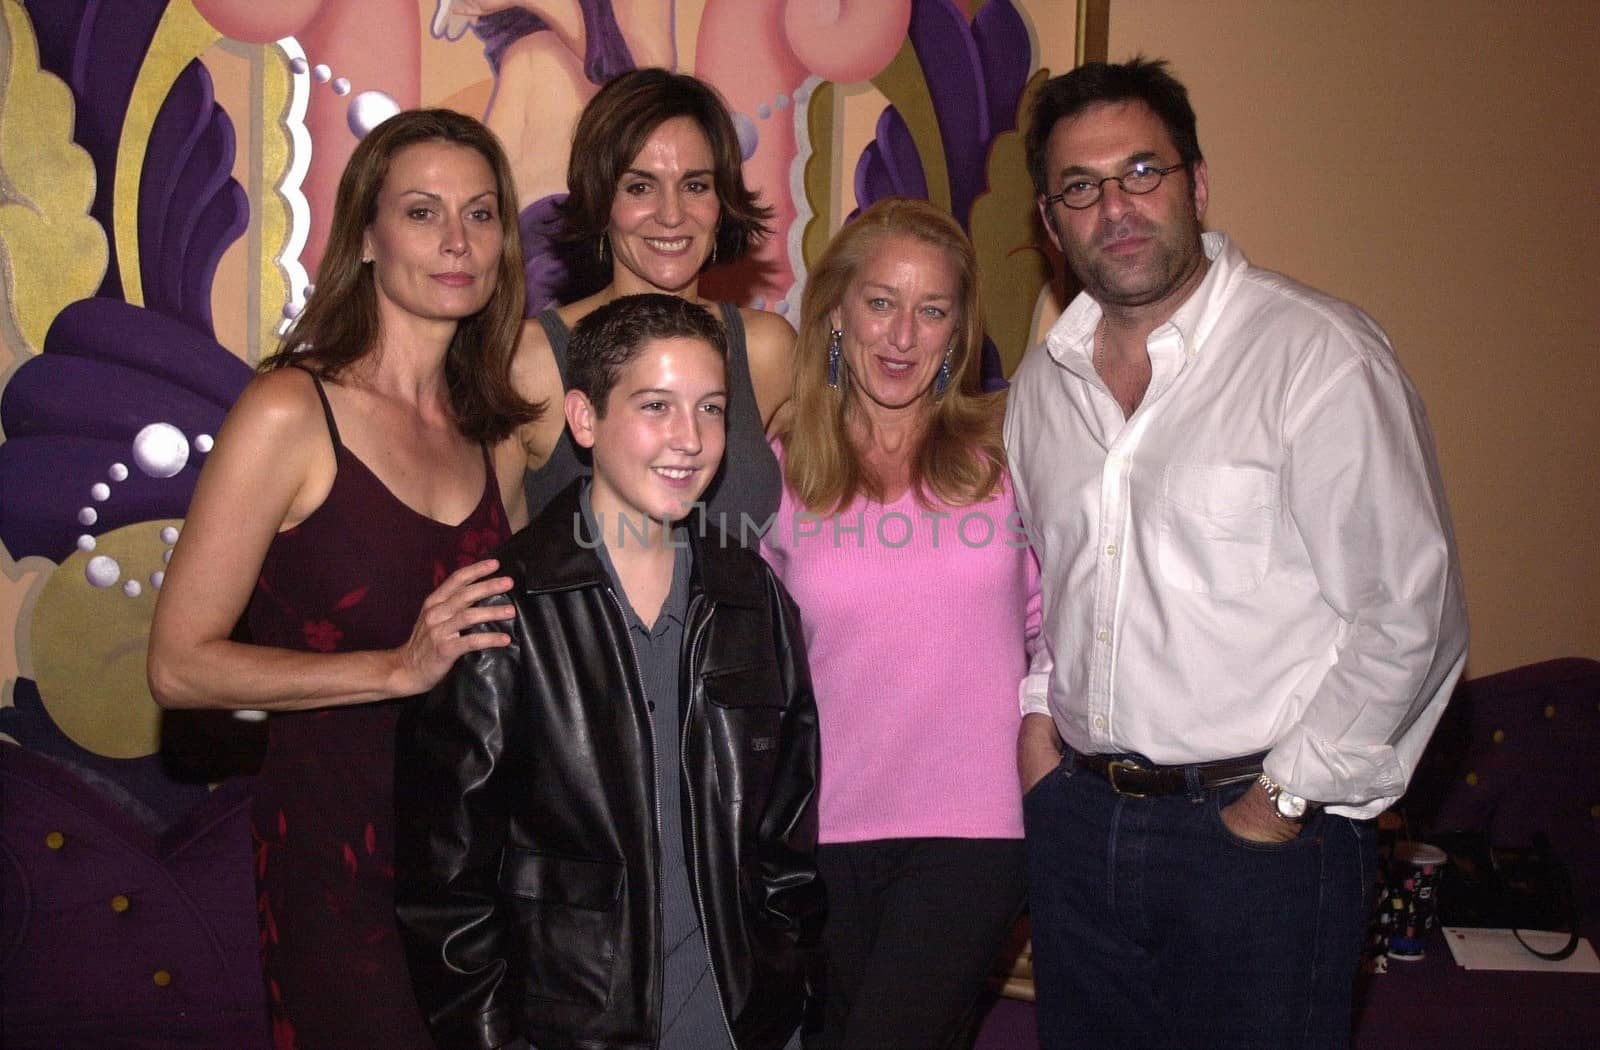 Mel Harris, Polly Draper, Patricia Wettig, Ken Olin and Christopher George Marquette at the premiere of "The Tic Code" in Los Angeles. 08-02-00